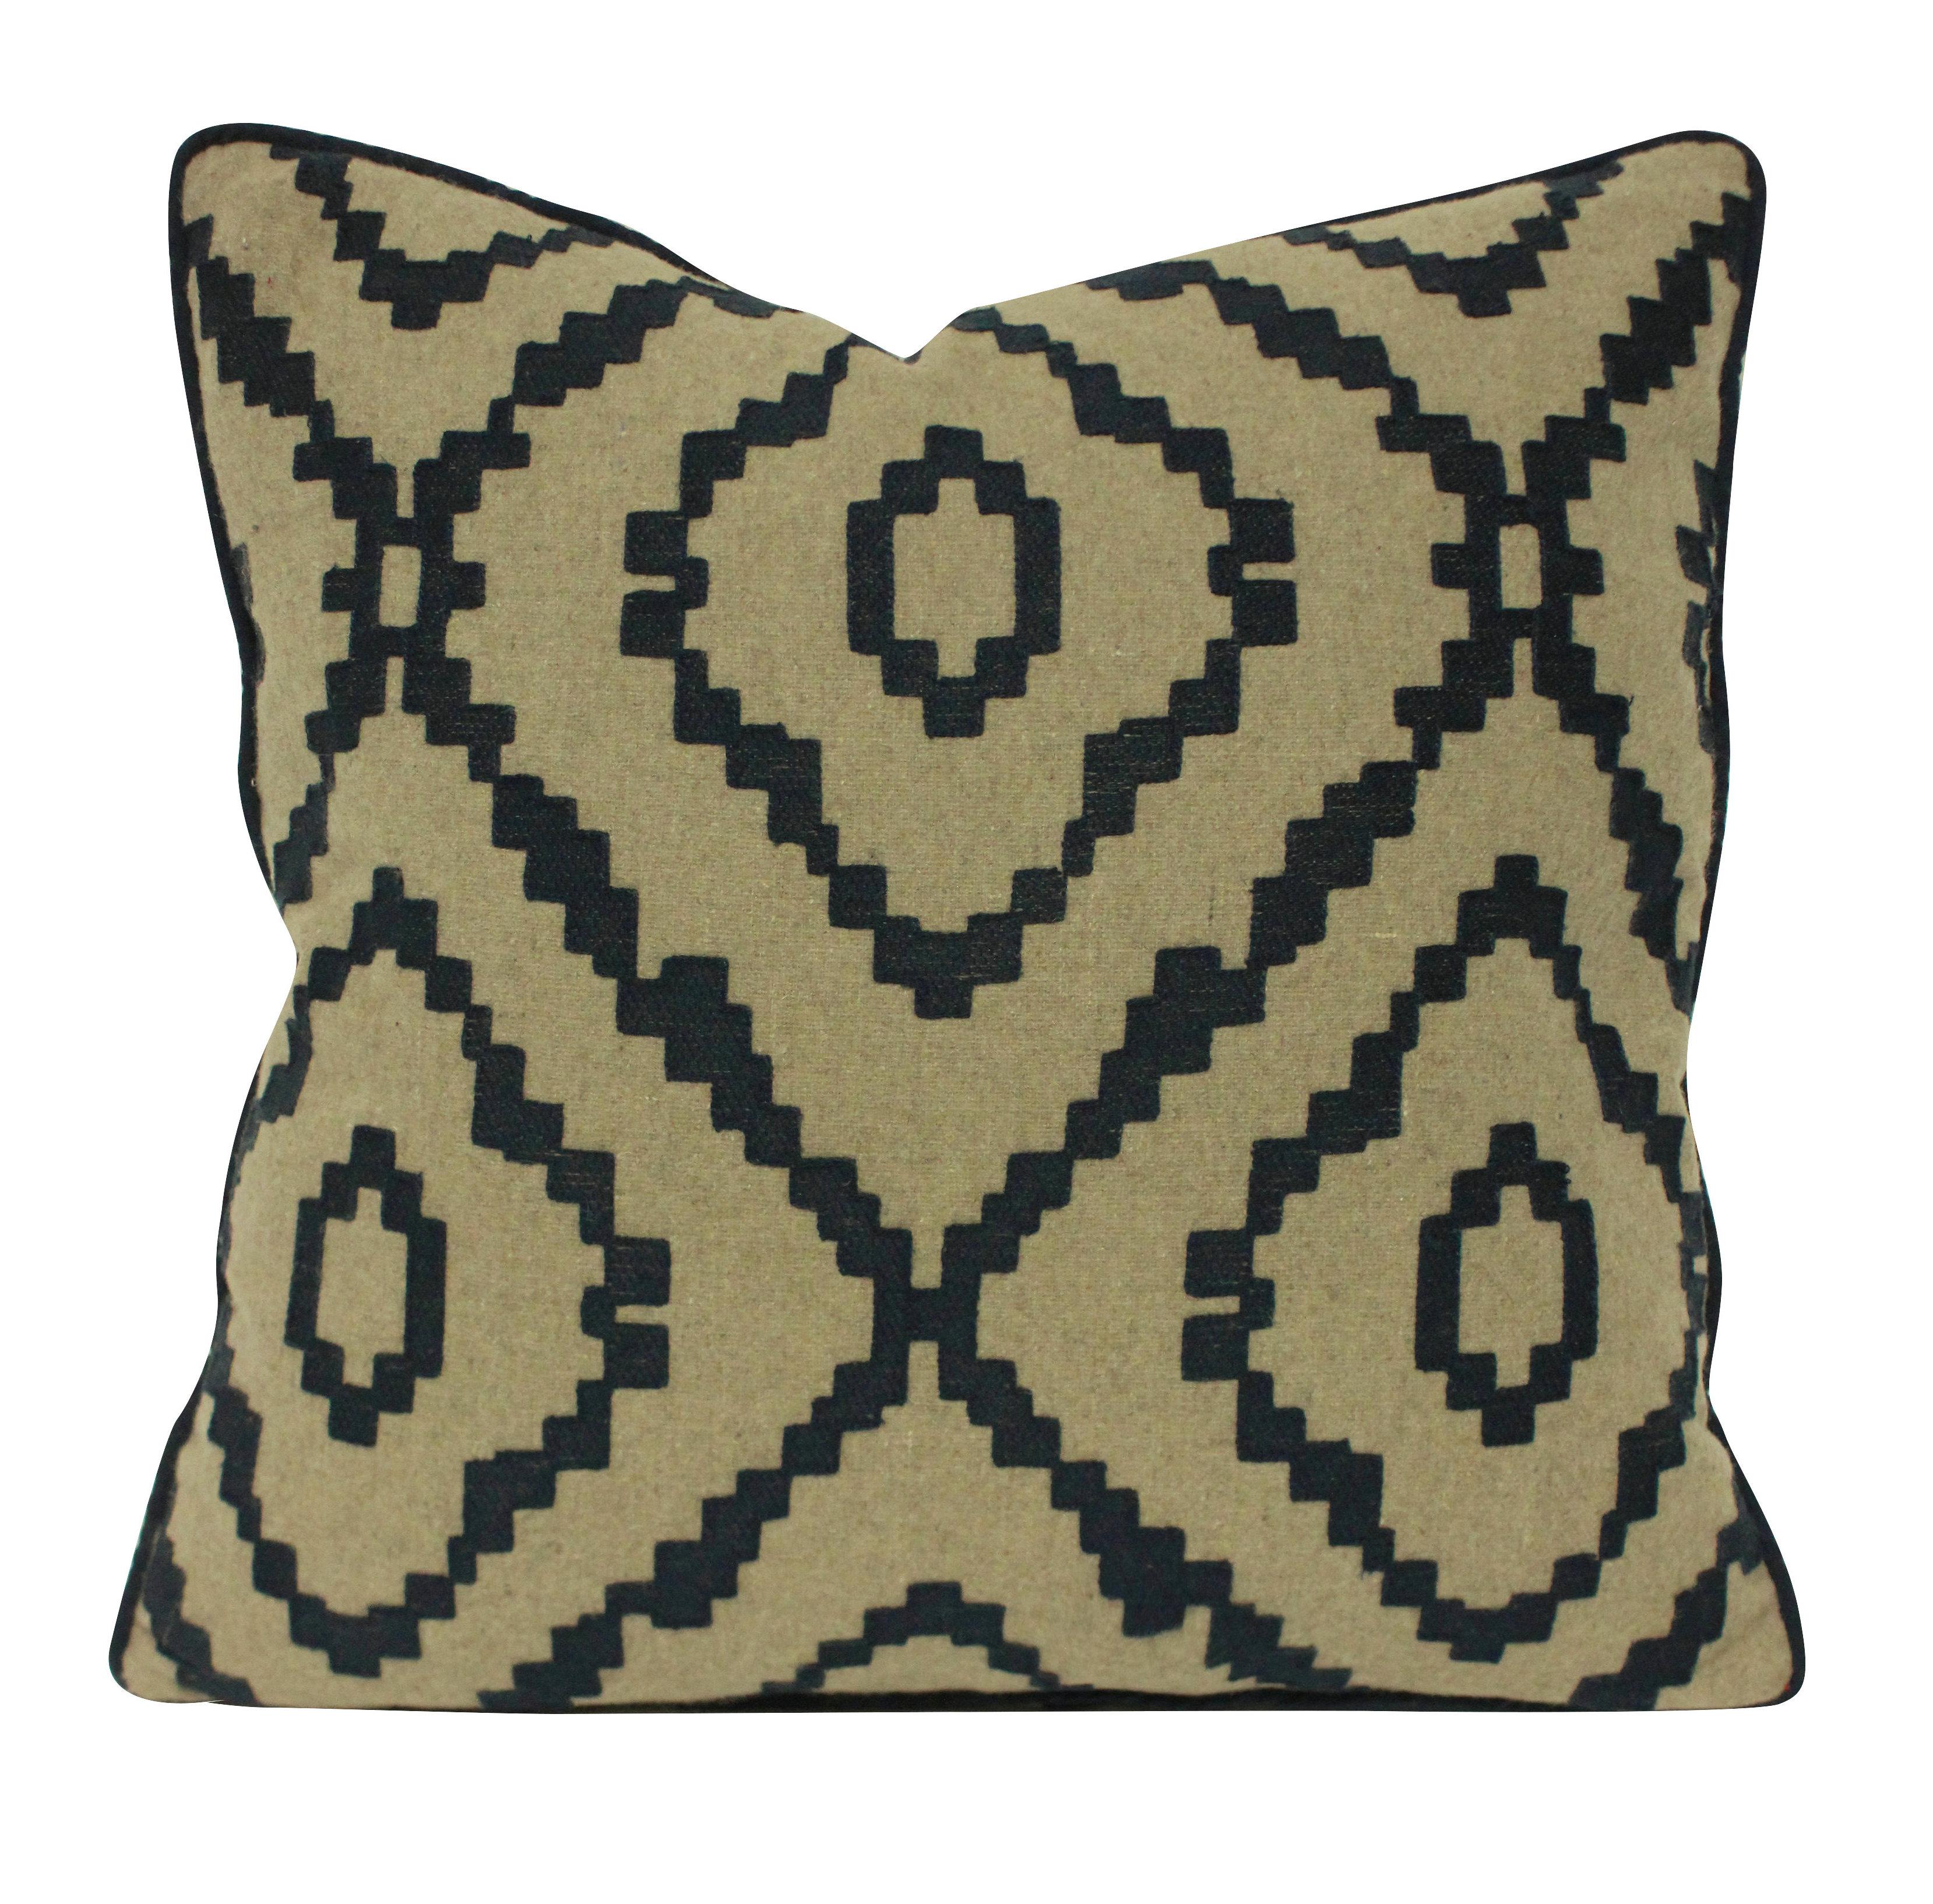 A set of six bespoke cushions in a discontinued Romo fabric in tobacco colored wool with a dark blue appliqué geometric design. With feather pads.